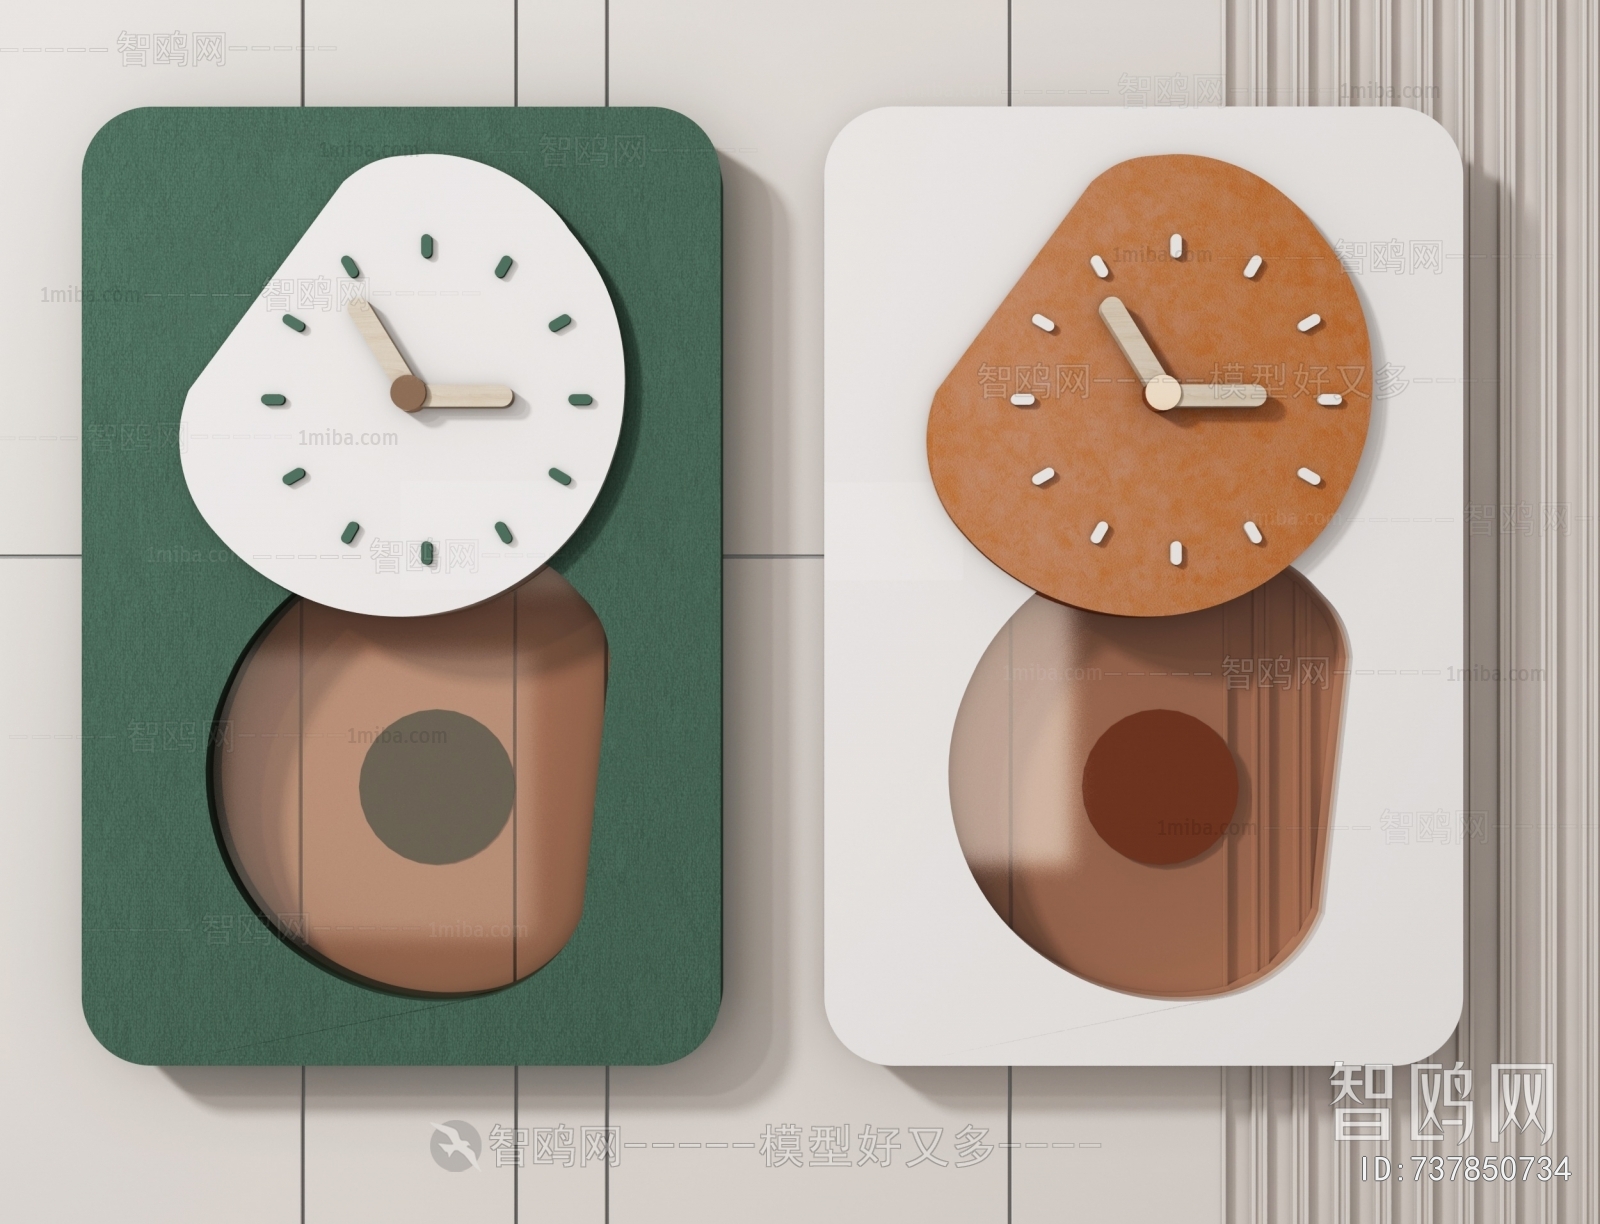 Nordic Style Clocks And Watches